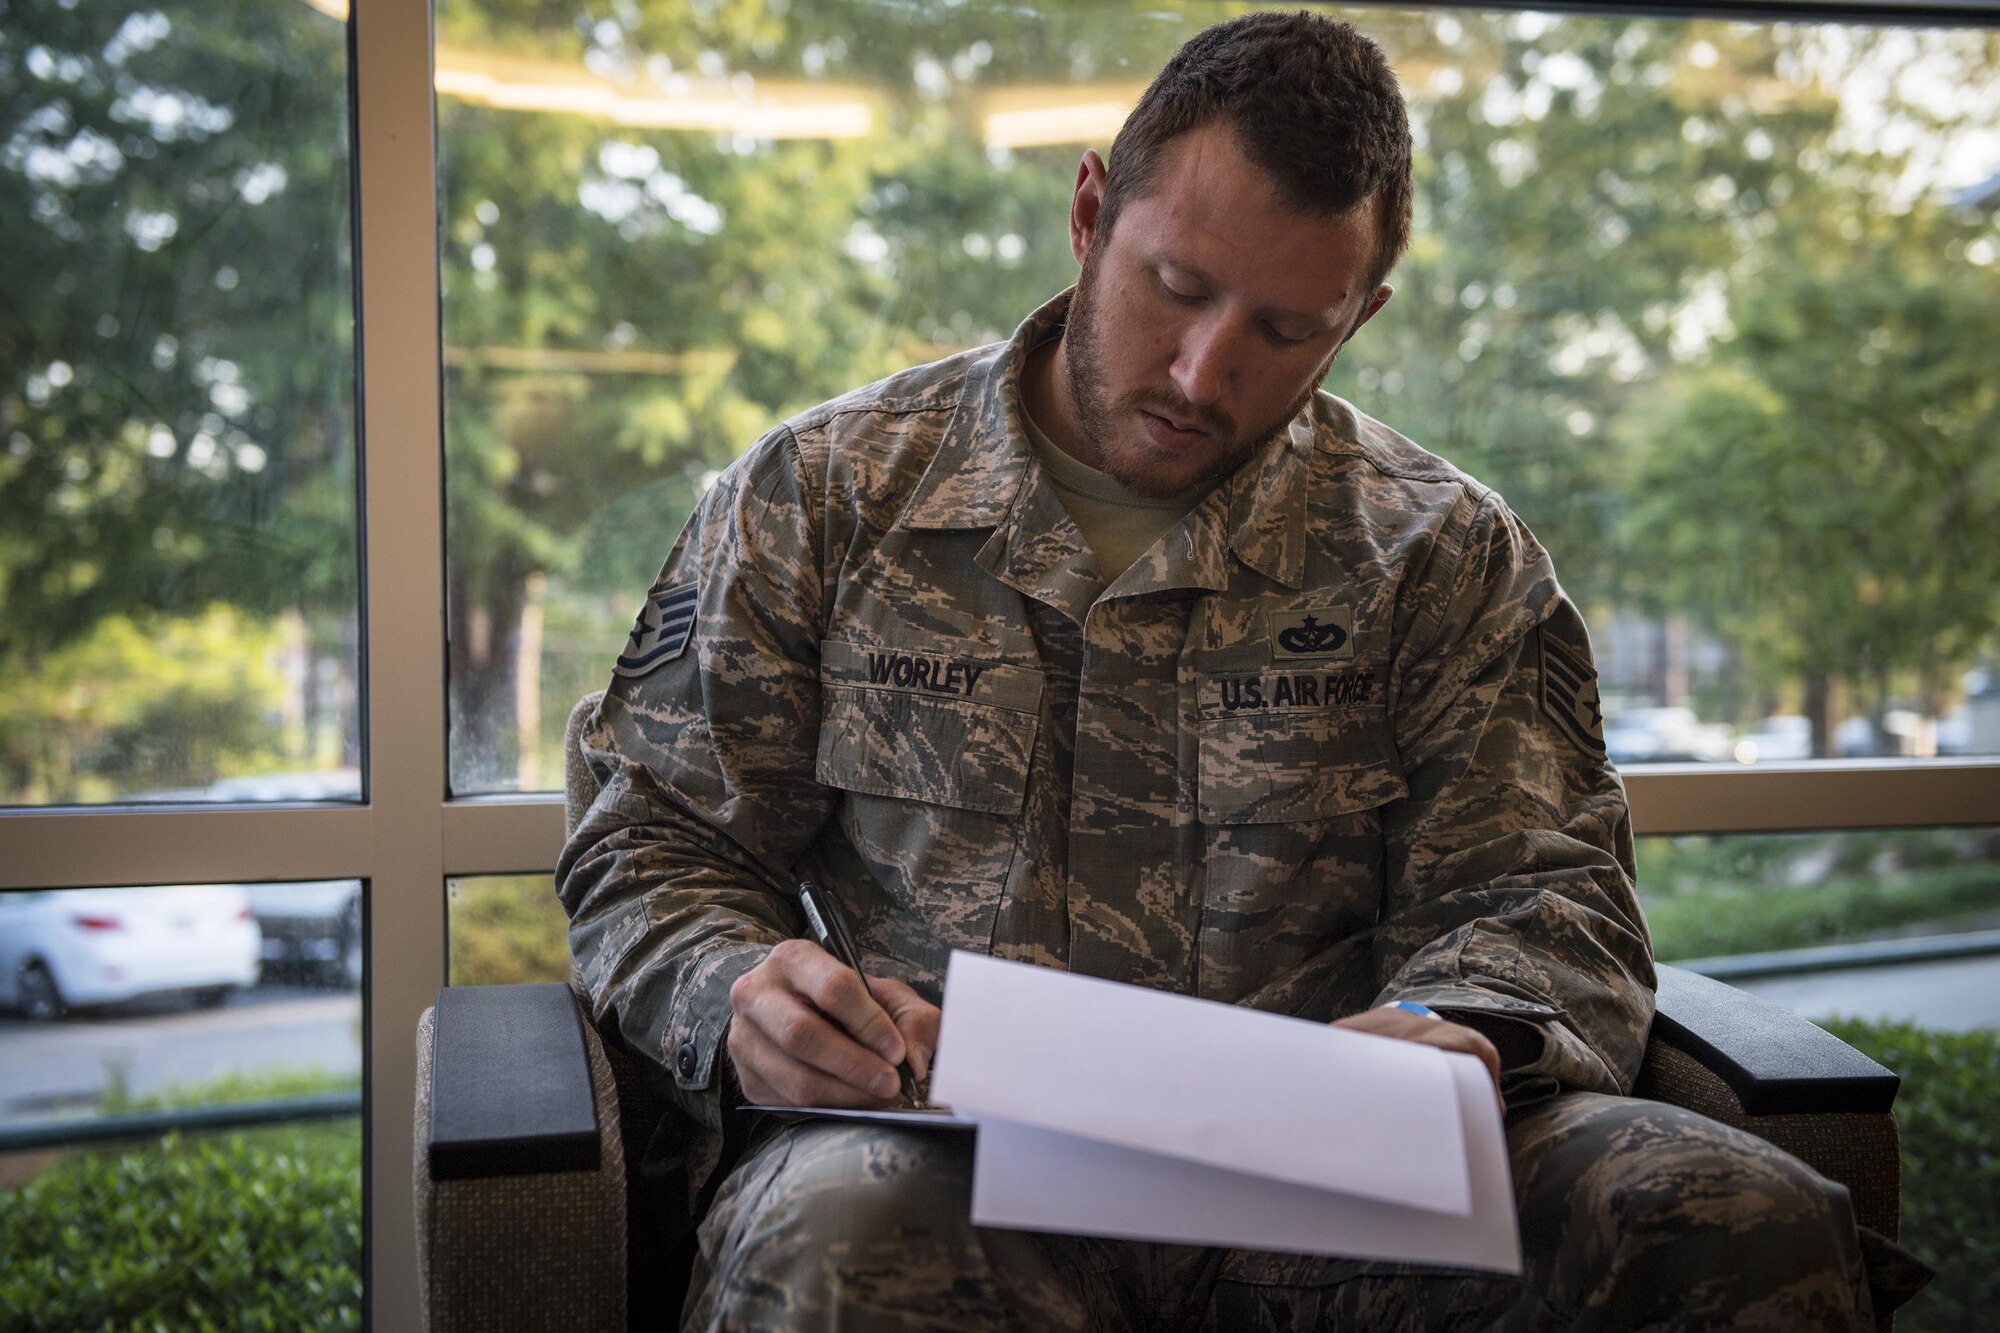 Staff Sgt. Nicholas Worley, 23d Civil Engineer Squadron electrical systems craftsman, fills out paperwork before a doctor’s appointment, April 18, 2017, in Valdosta, Ga. In January 2012 Worley was diagnosed with Chronic Myelogenous Leukemia, an uncommon form of blood-cell cancer that starts in the blood-forming bone marrow cells. He’s currently in remission and goes to the cancer center every three months to ensure his treatment is still working. (U.S. Air Force Photo by Senior Airman Janiqua P. Robinson)